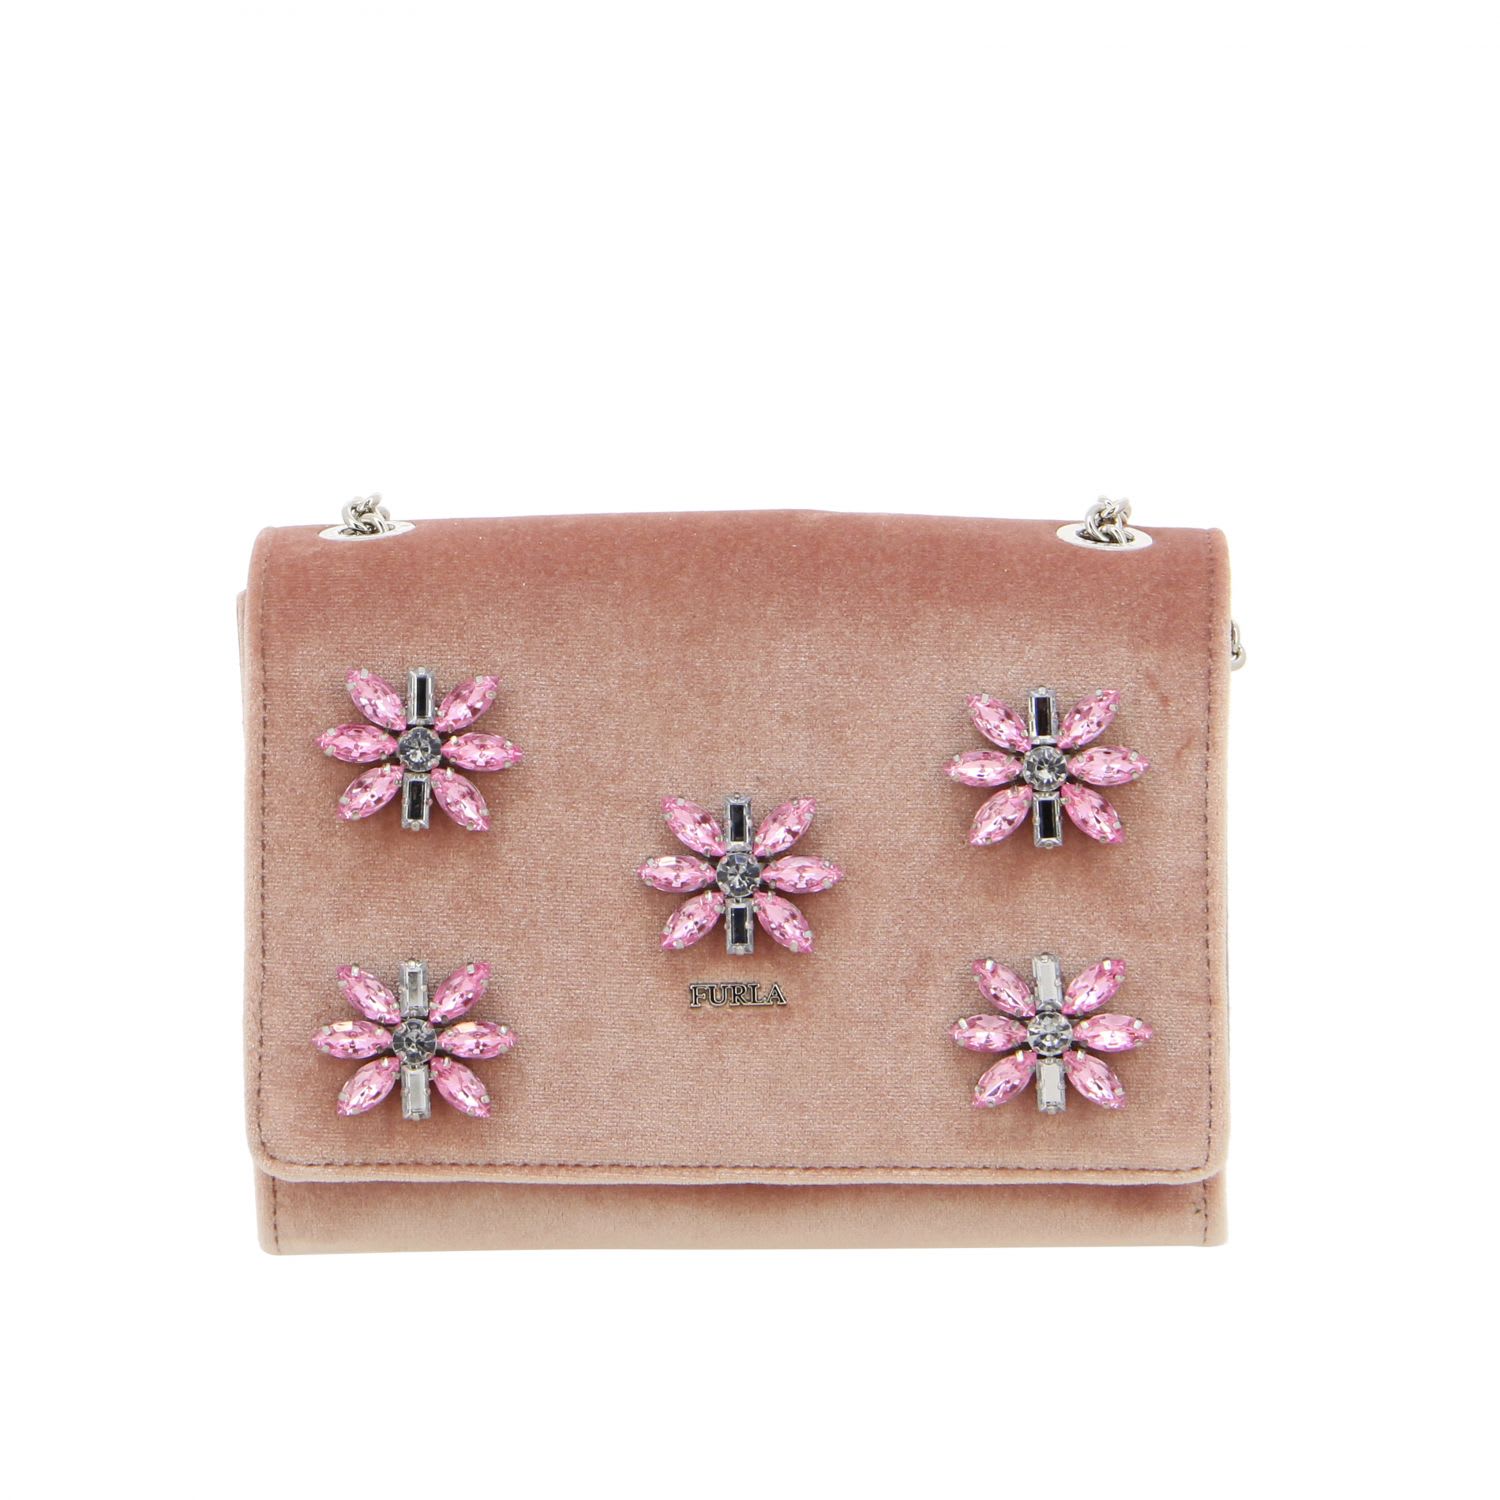 Furla Velvet Bag With Rhinestone Floral Applications In Pink